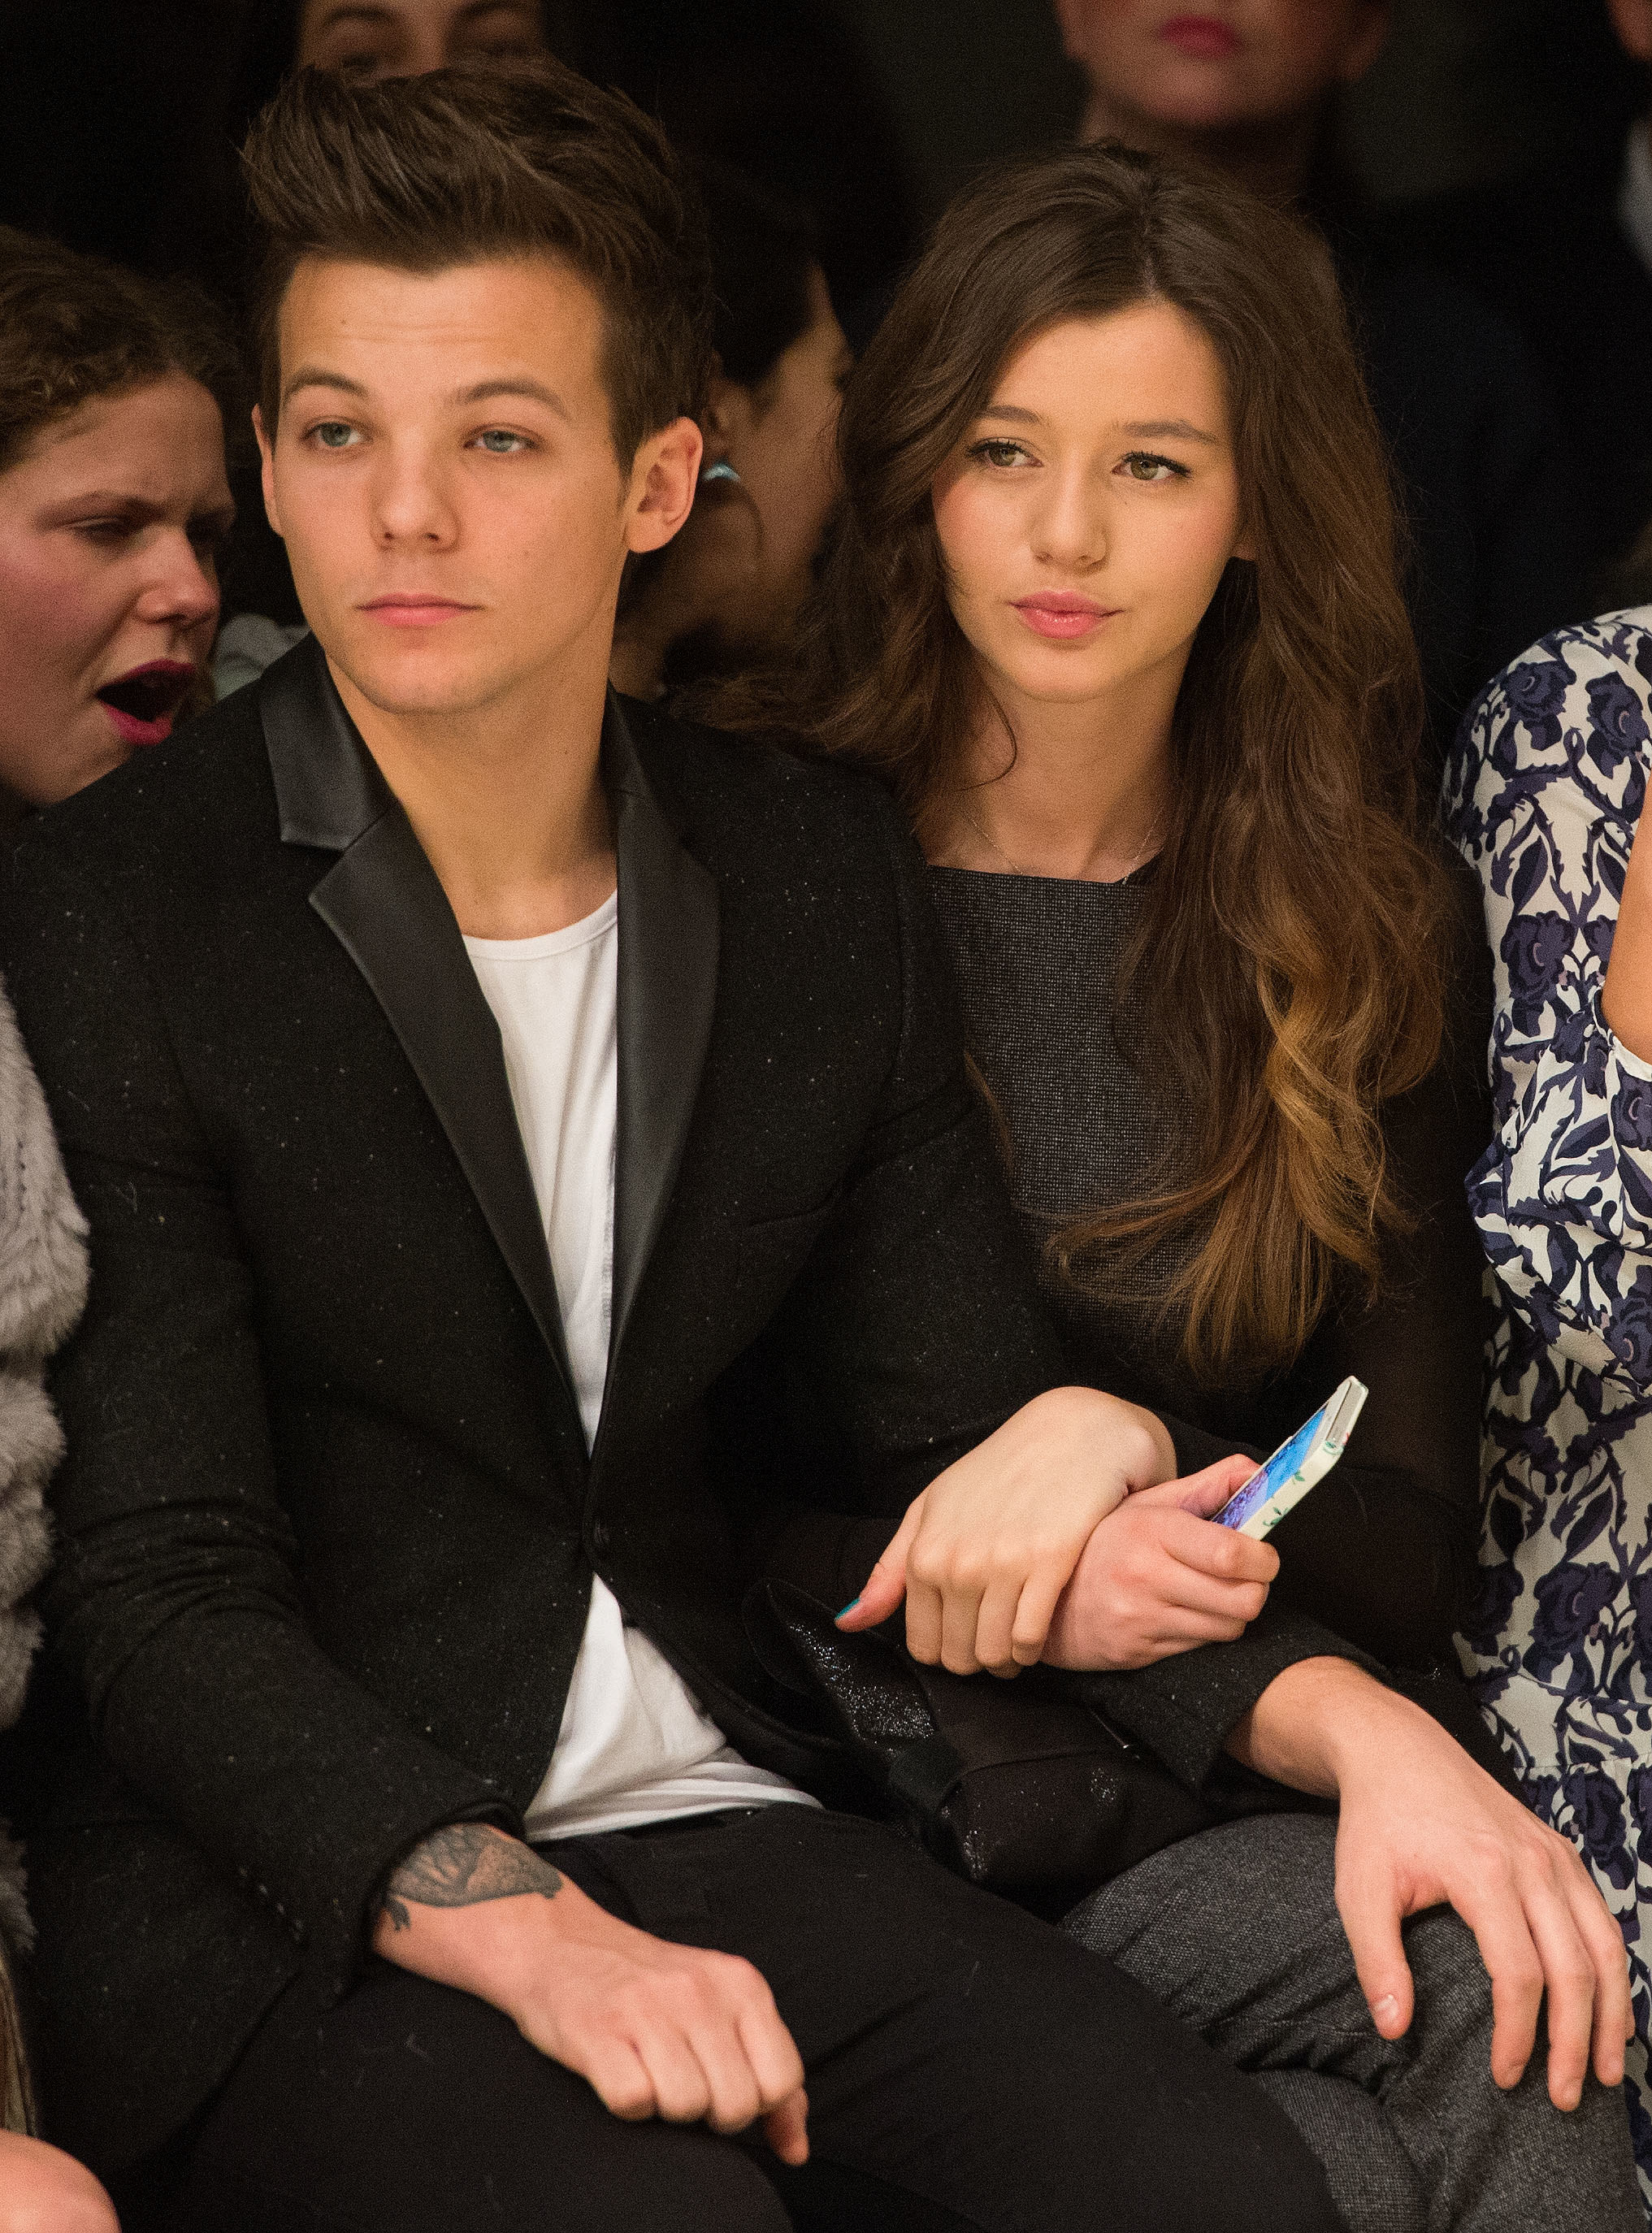 Louis Tomlinson of One Direction and Eleanor Calder attend the Topshop Unique show at the Tate Modern during London Fashion Week Fall/Winter 2013/14